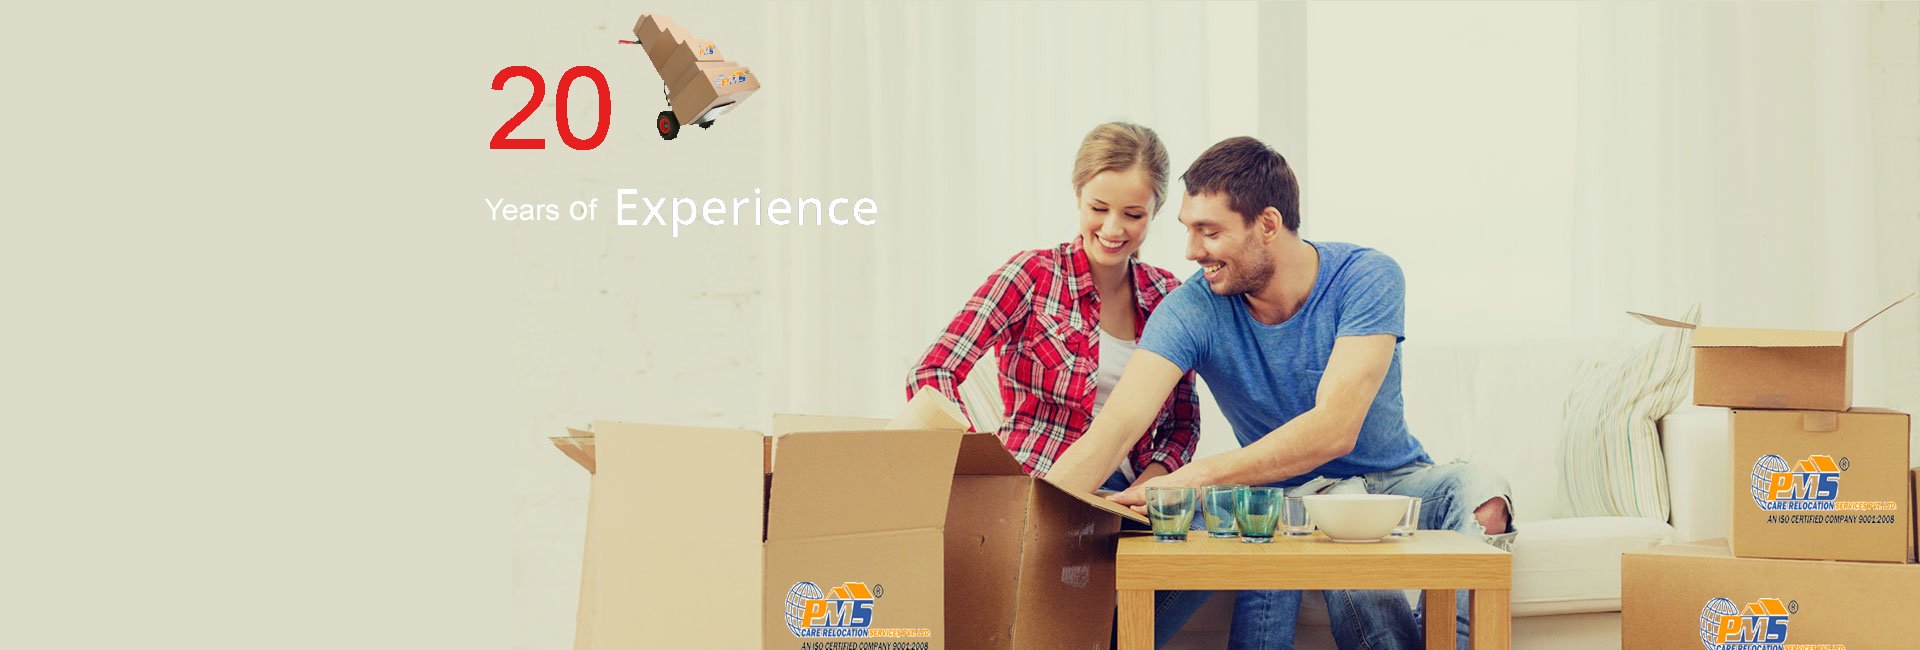 packers and movers pune, packers and movers in pune, packers and movers services pune, movers and packers, Packers and Movers, relocation services pune